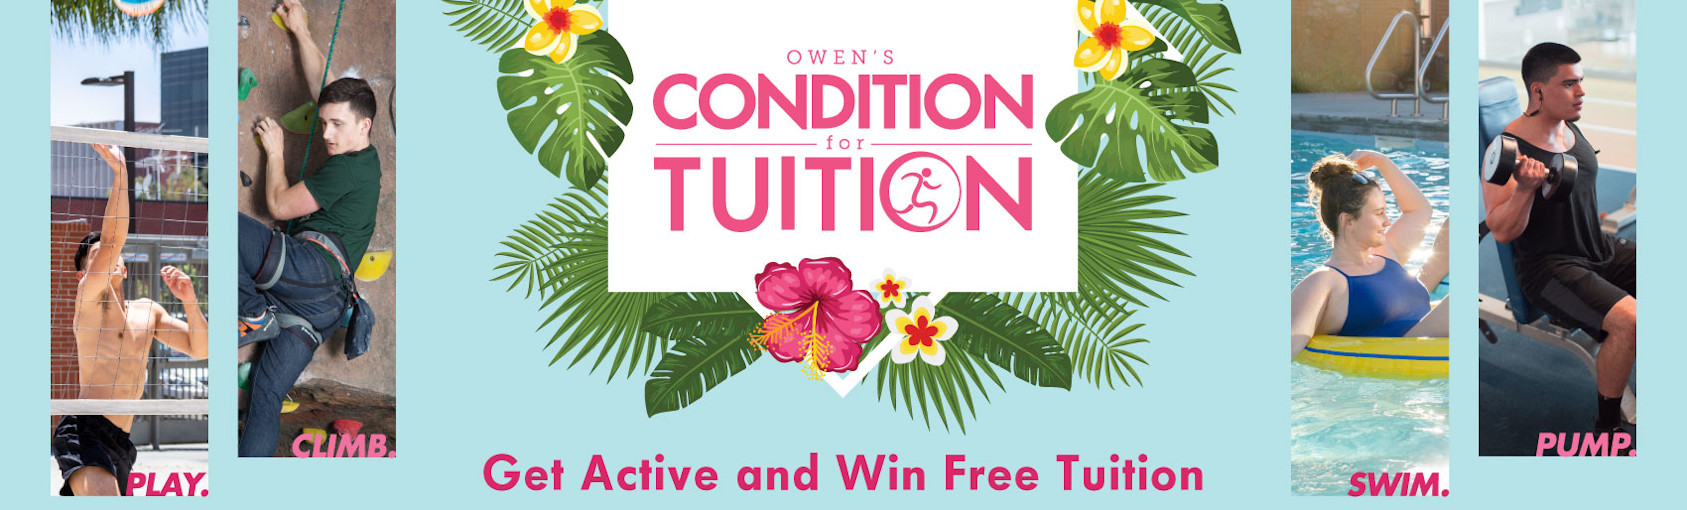 Get Active and Win Free Tuition Banner